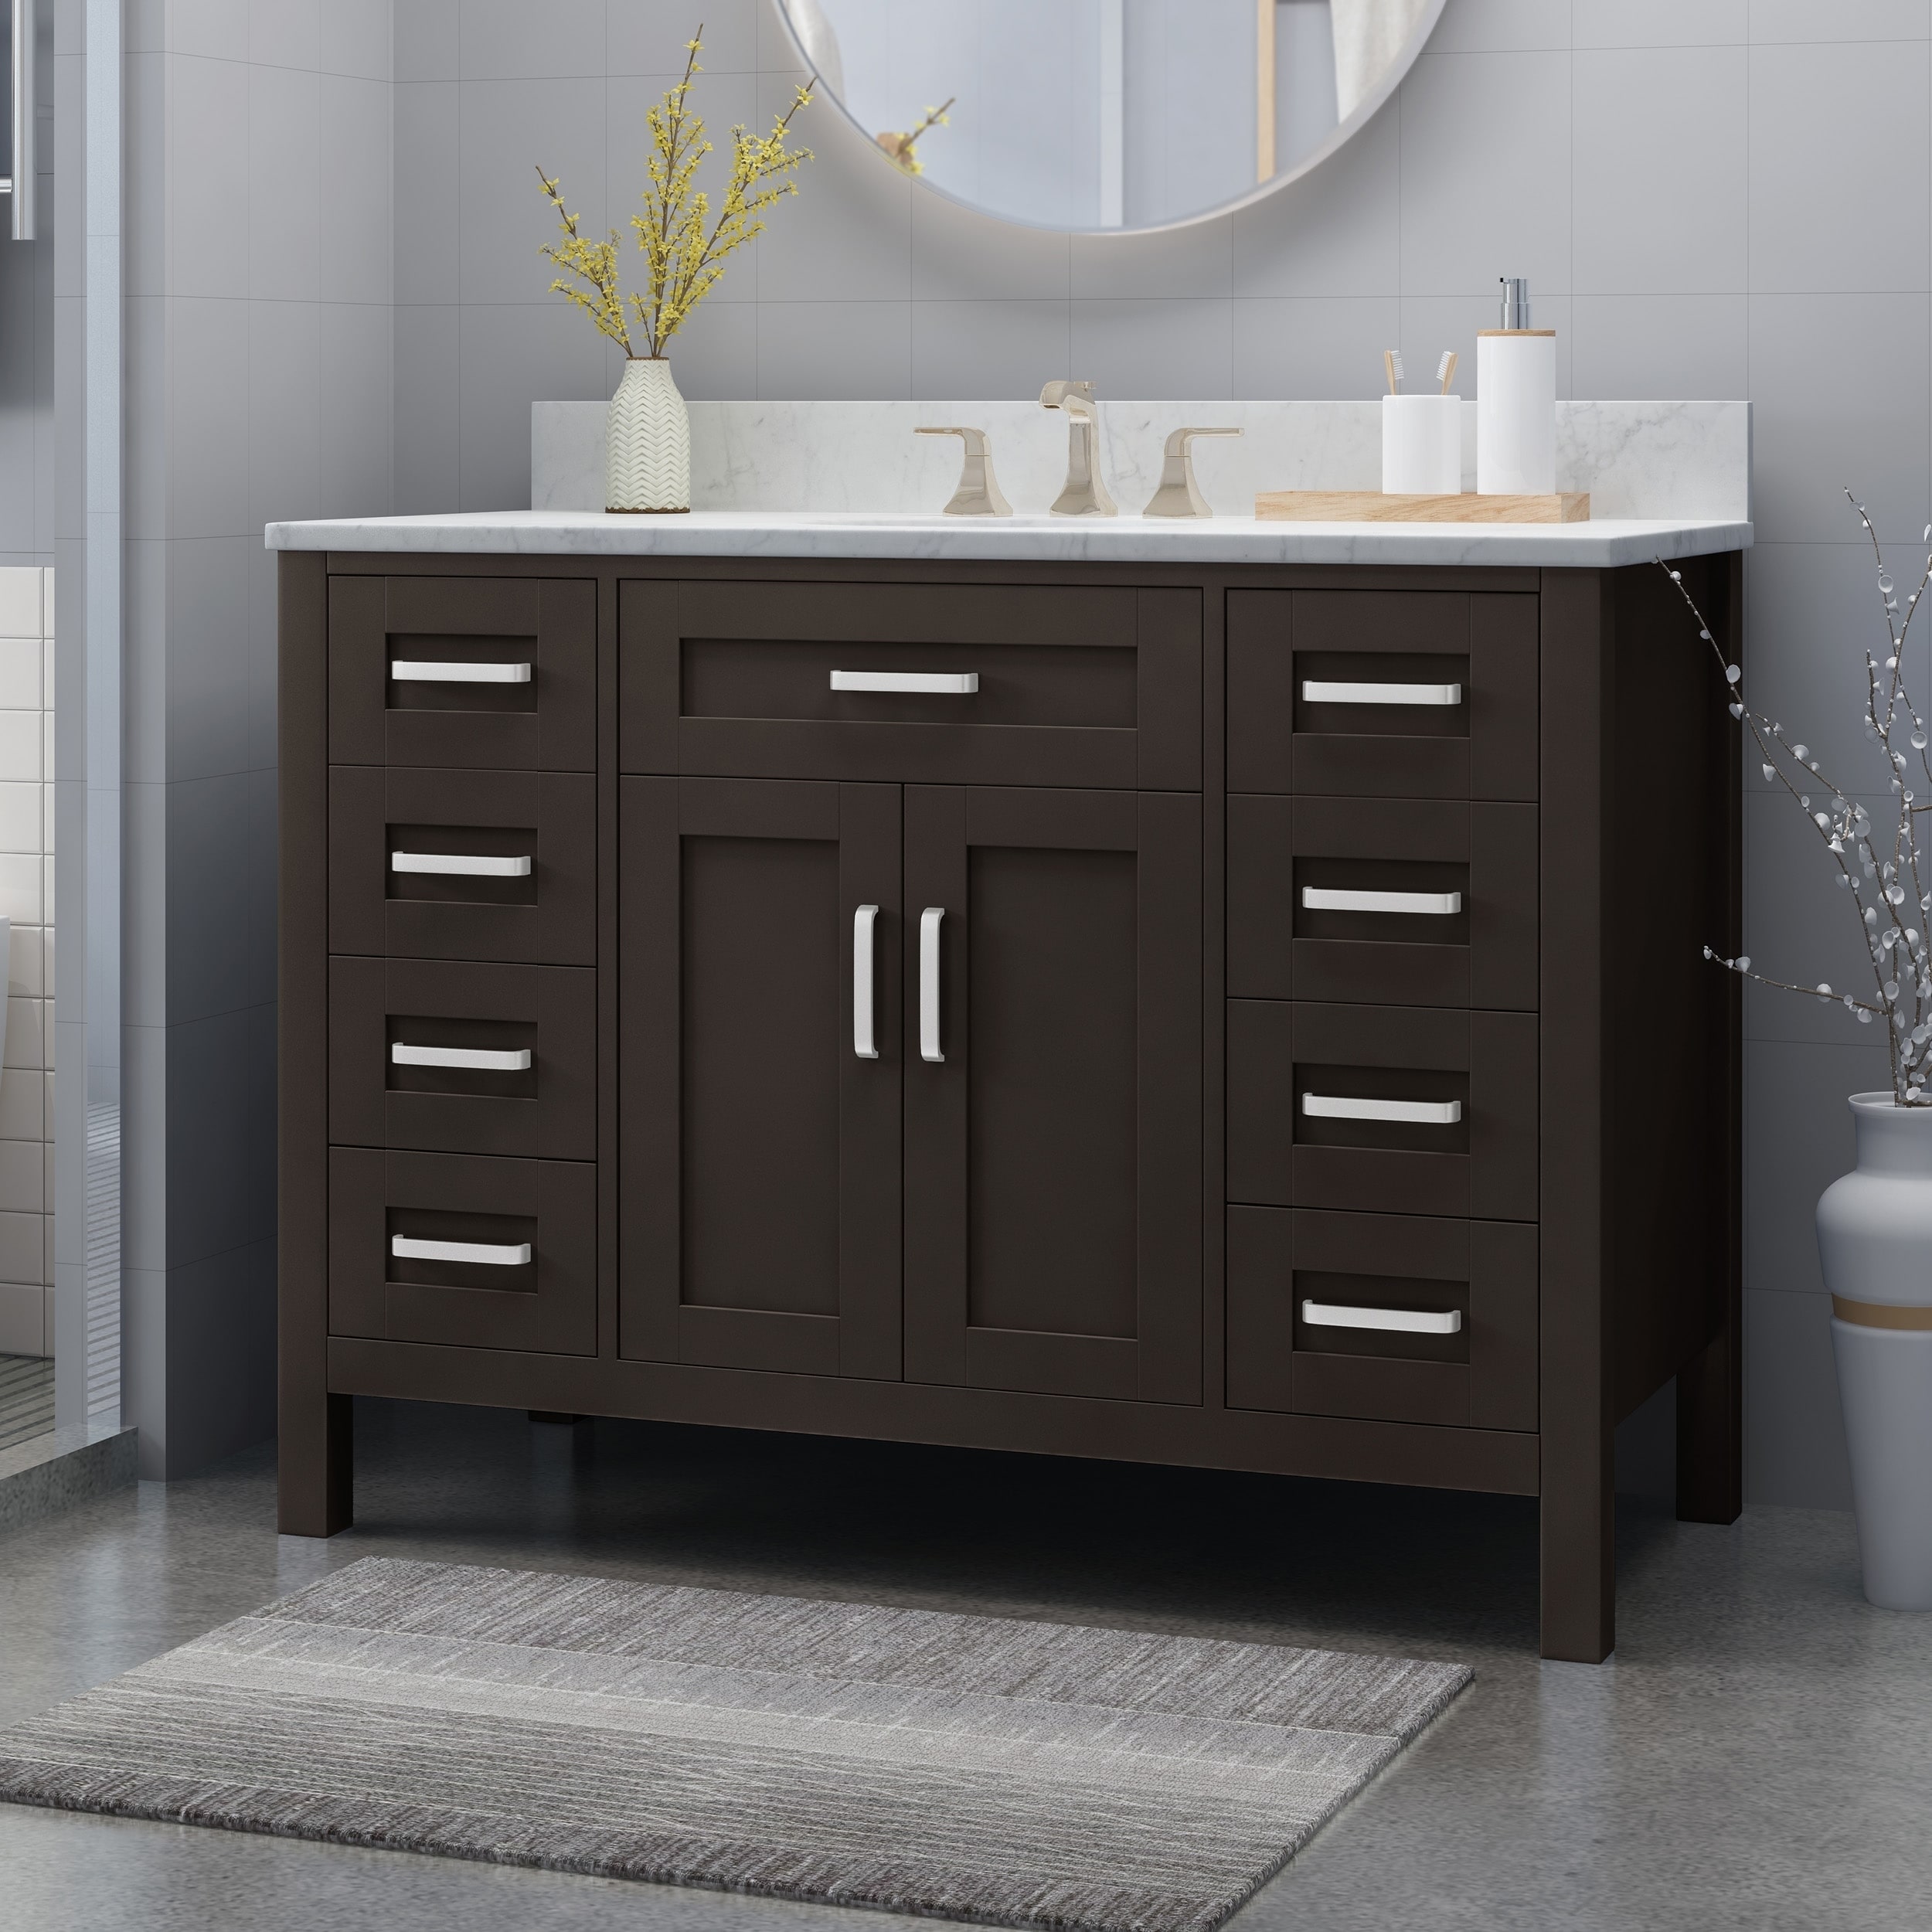 Greeley Contemporary 48 Wood Single Sink Bathroom Vanity With Carrera Marble Top By Christopher Knight Home On Sale Overstock 25716175